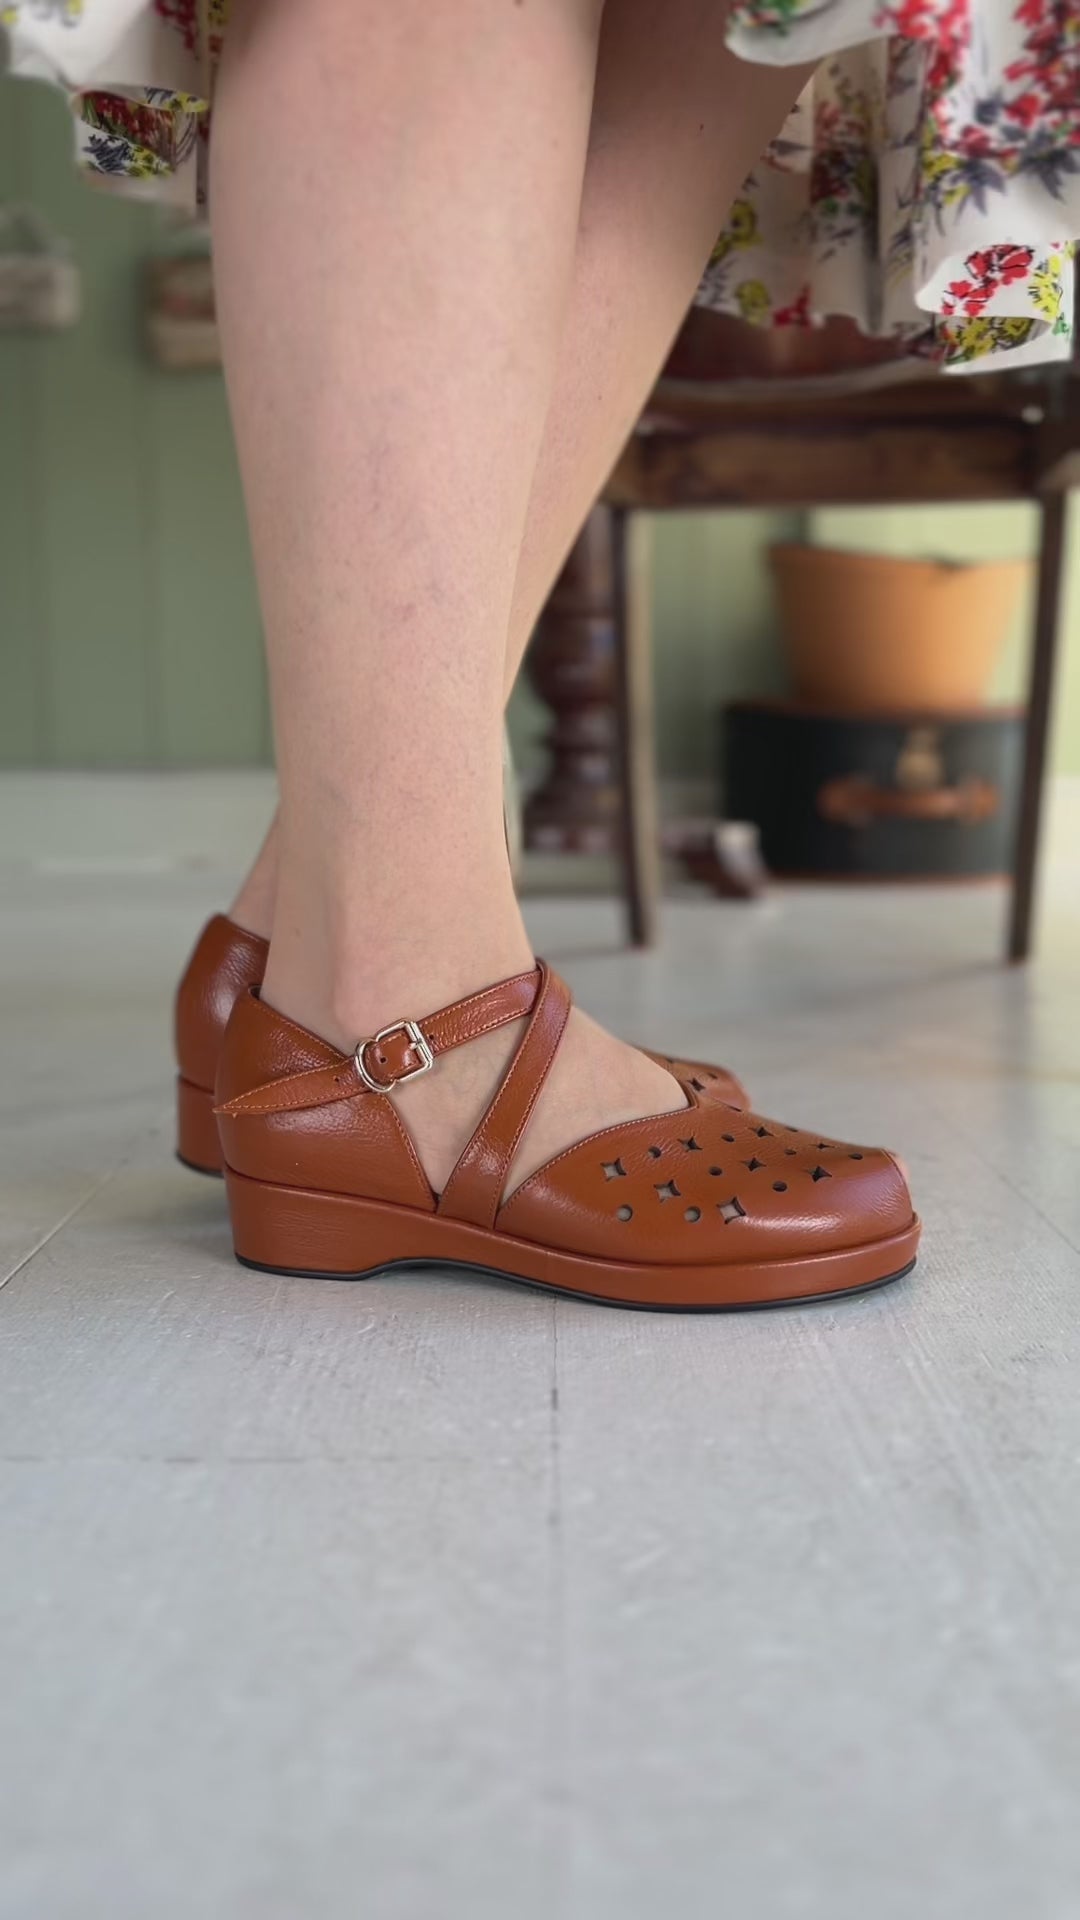 1940s style summer sandals /  wedges - Brown - Norma